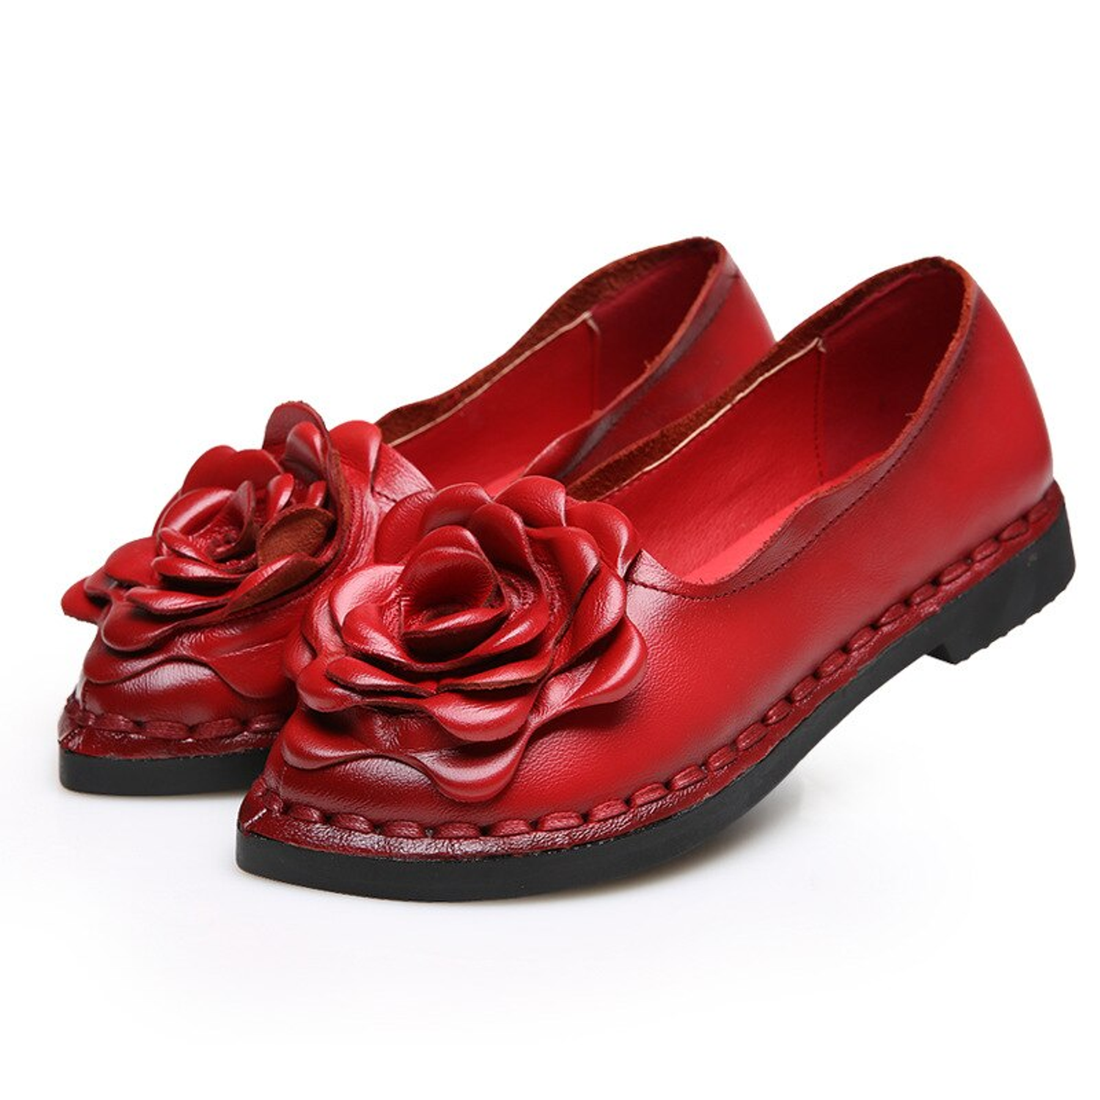 Women's Autumn Genuine Leather Pointed Toe Flats